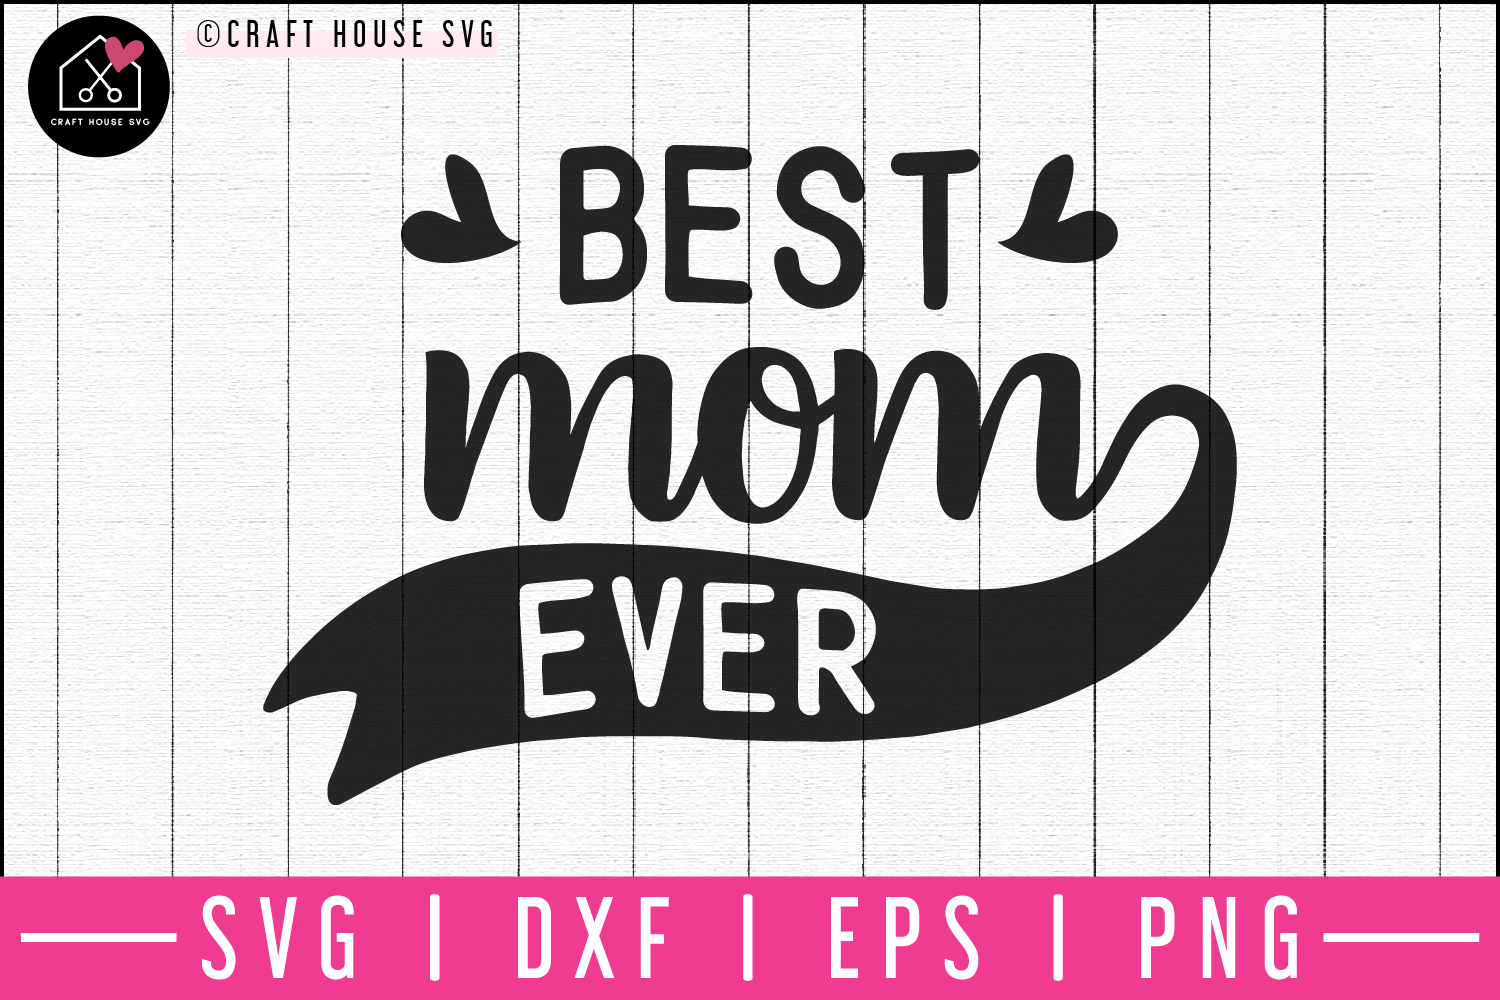 Best mom ever SVG | M52F Craft House SVG - SVG files for Cricut and Silhouette